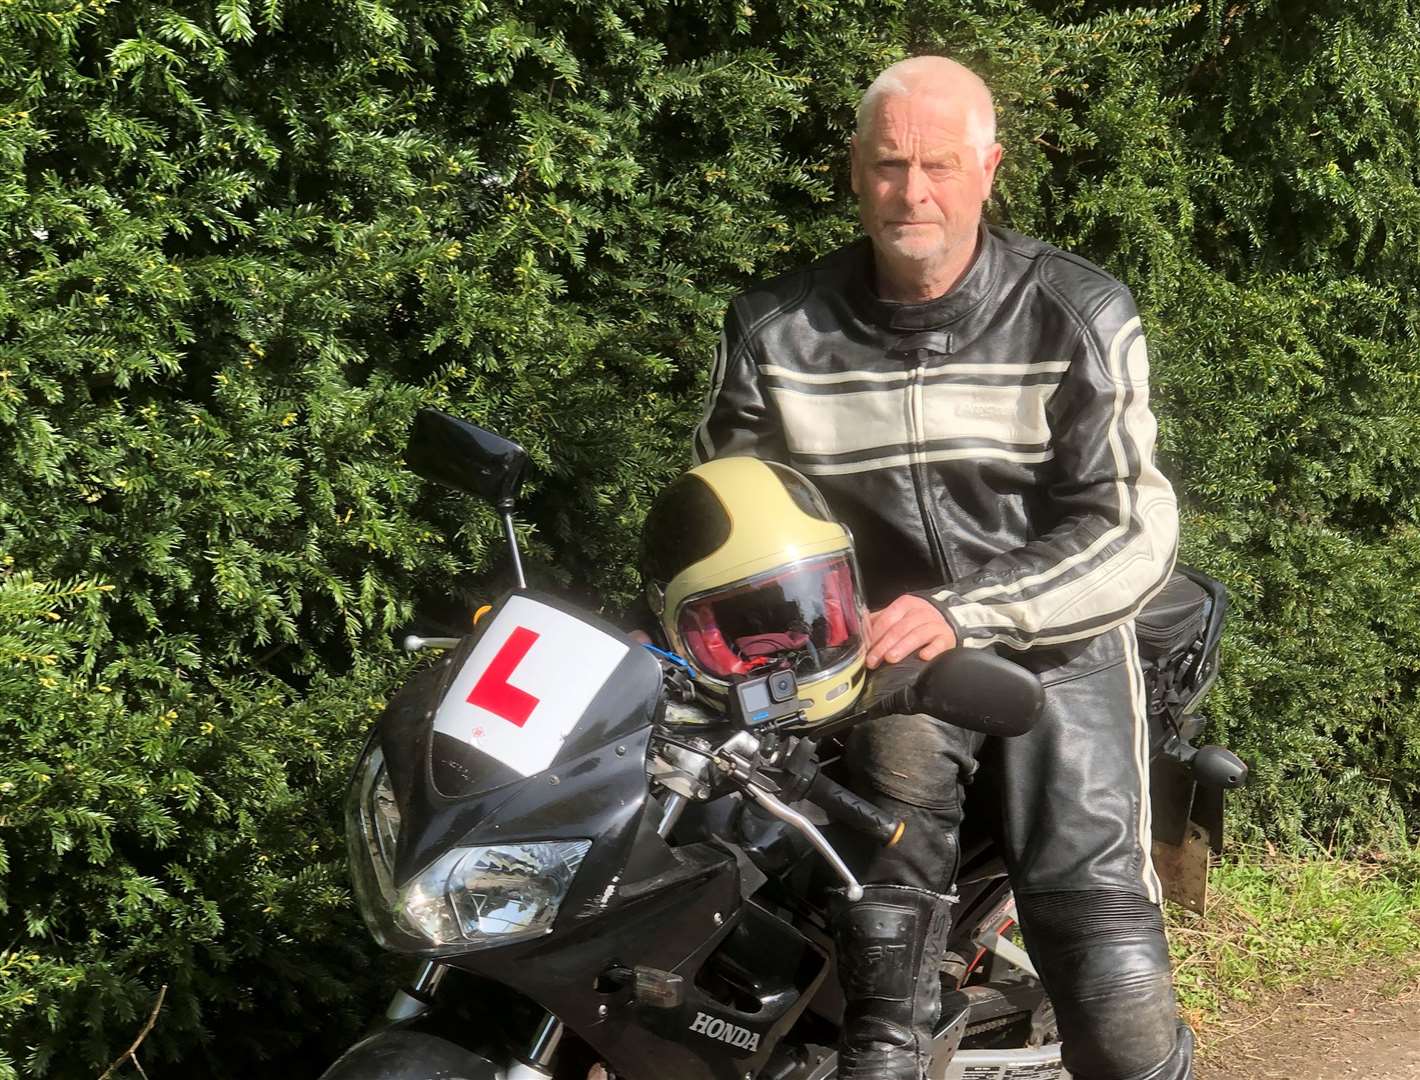 Steve Matthews, 69, only began riding a motorbike in the last year and wants more drivers to be aware of the added danger of potholes when on two wheels